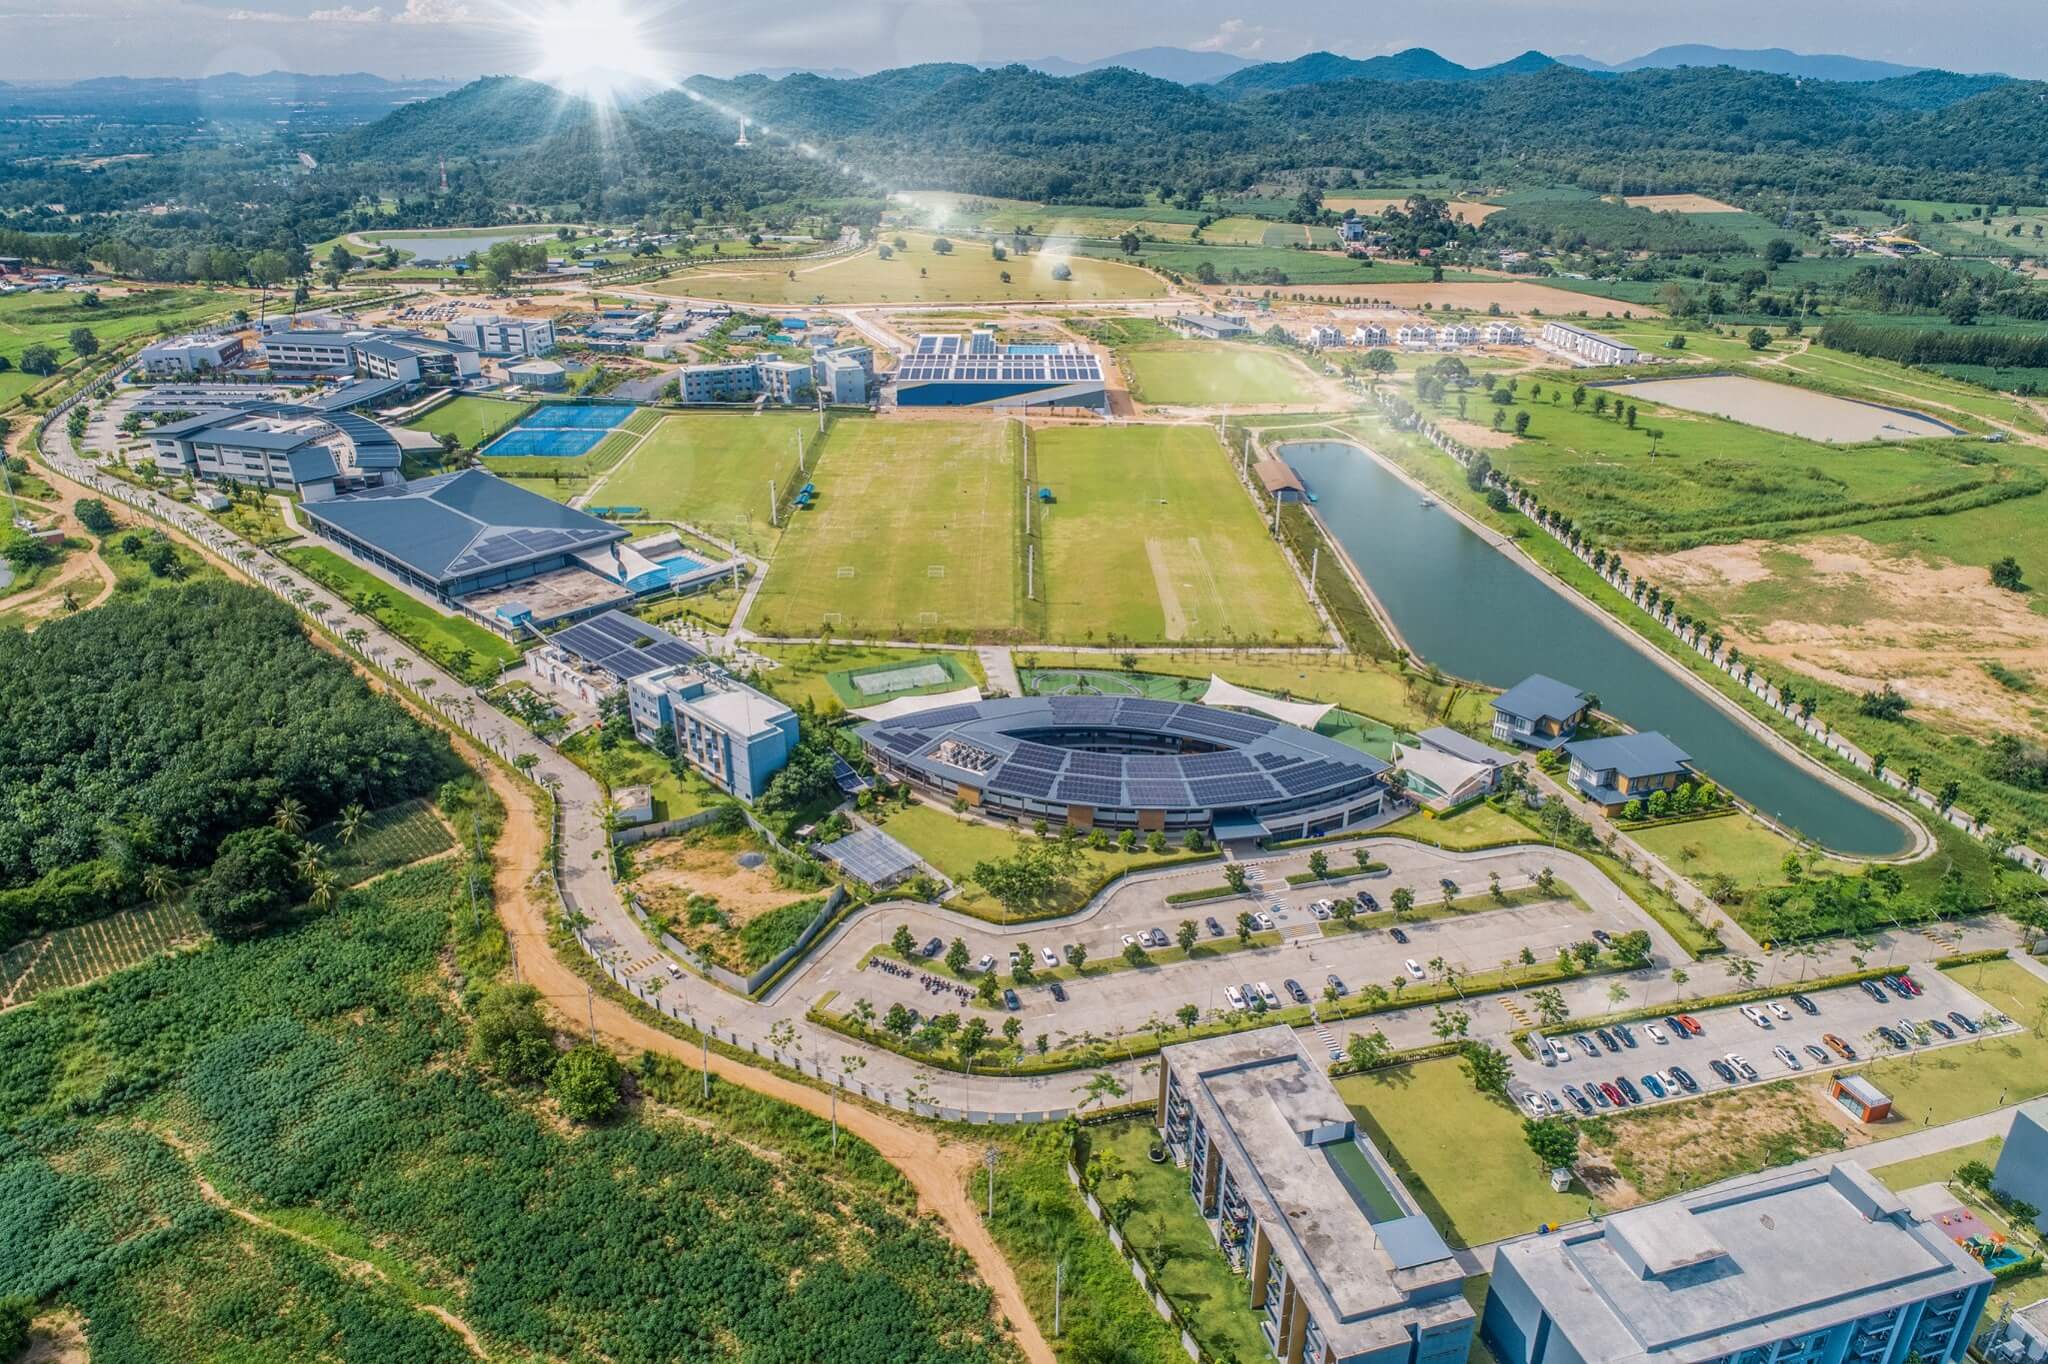 Rugby School Thailand: The best of British education in Asia